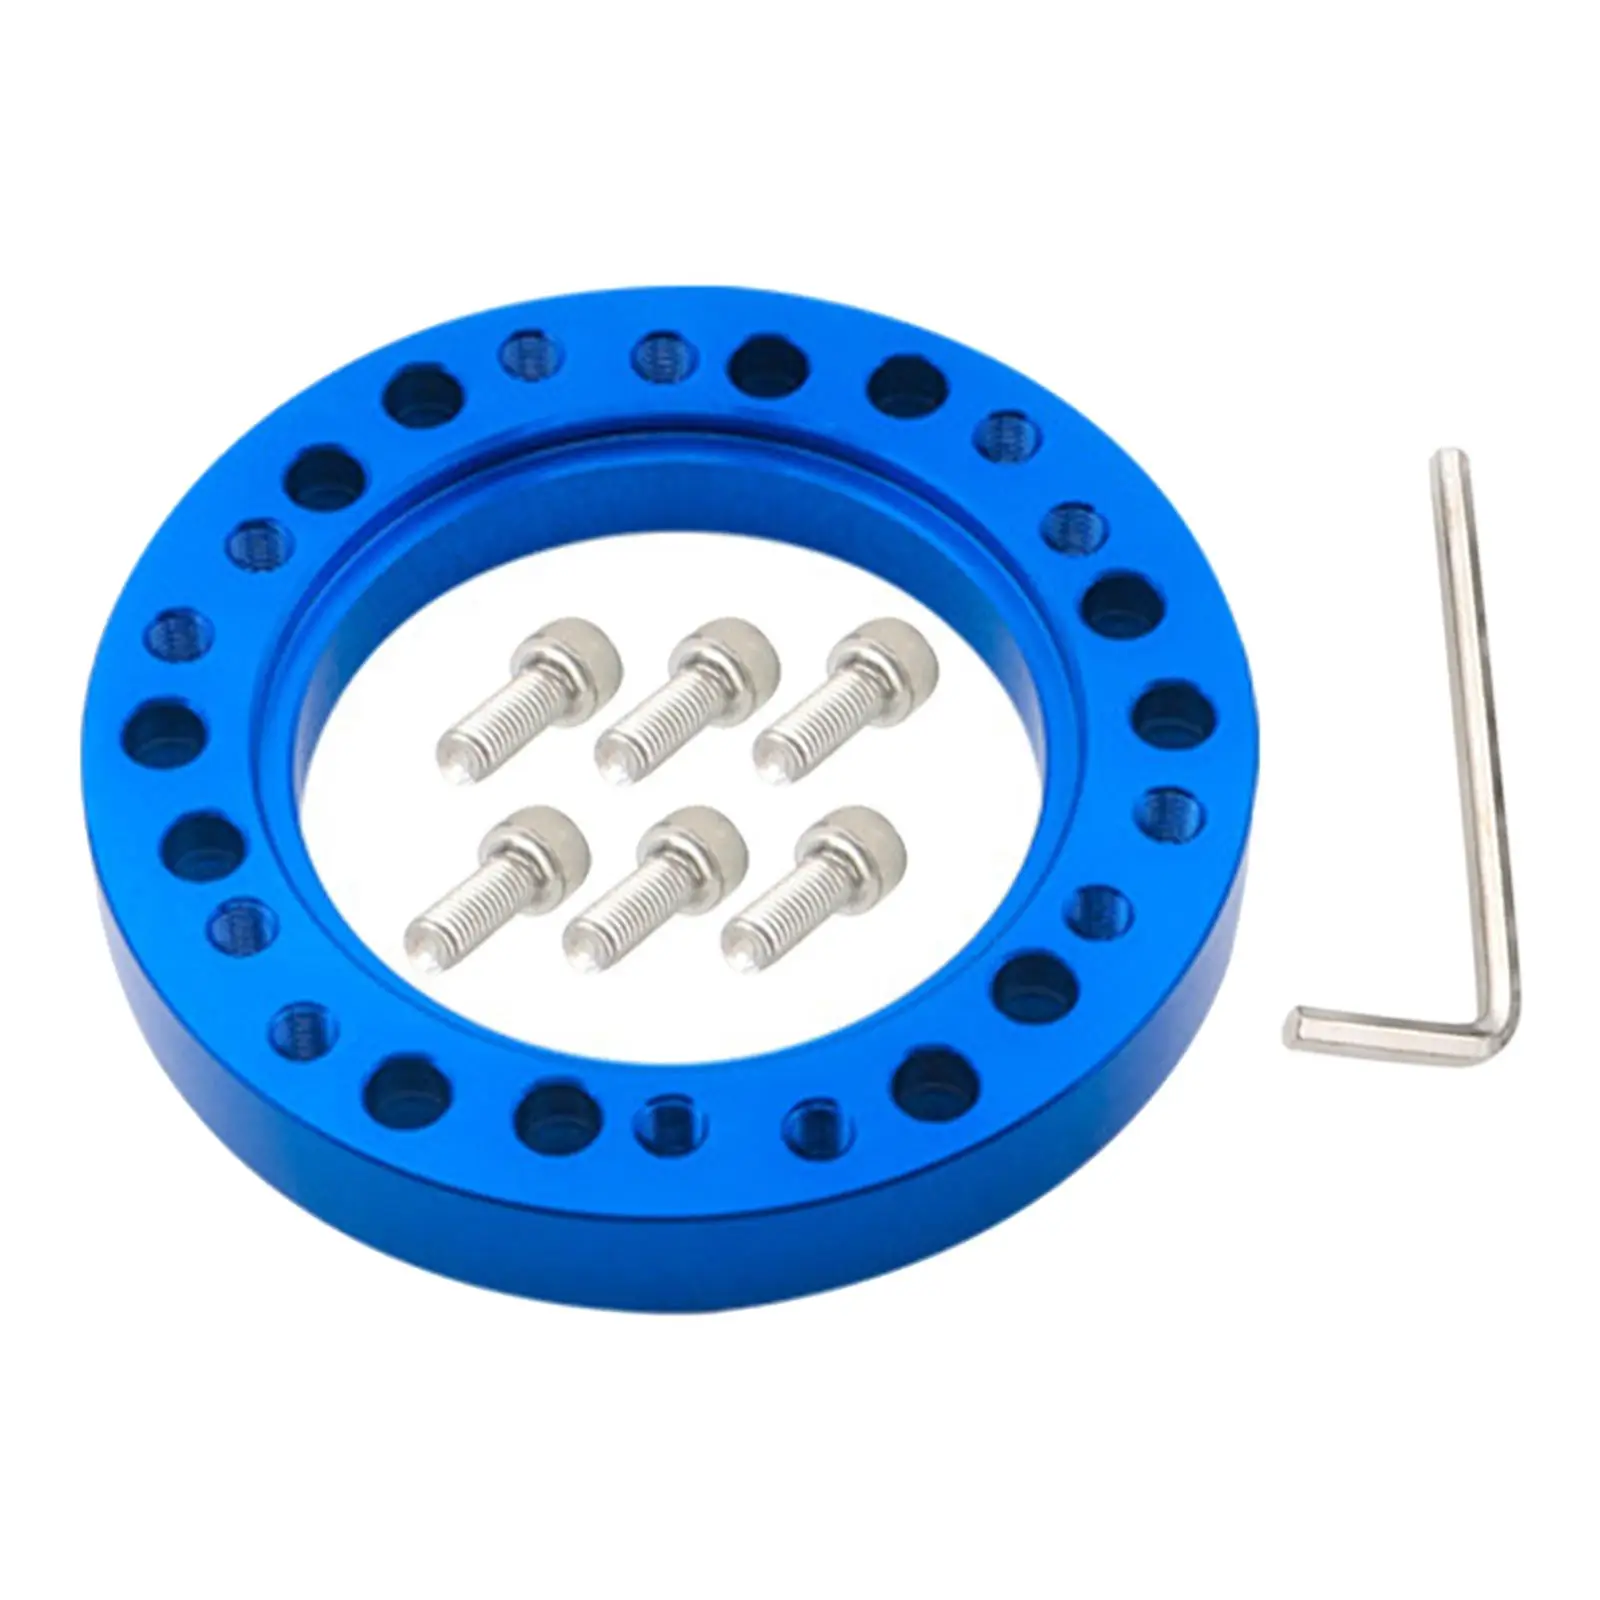 Aluminum Alloy Car Steering Wheel Hub Adapter Spacer Pad with Six Screws Vehicle Parts